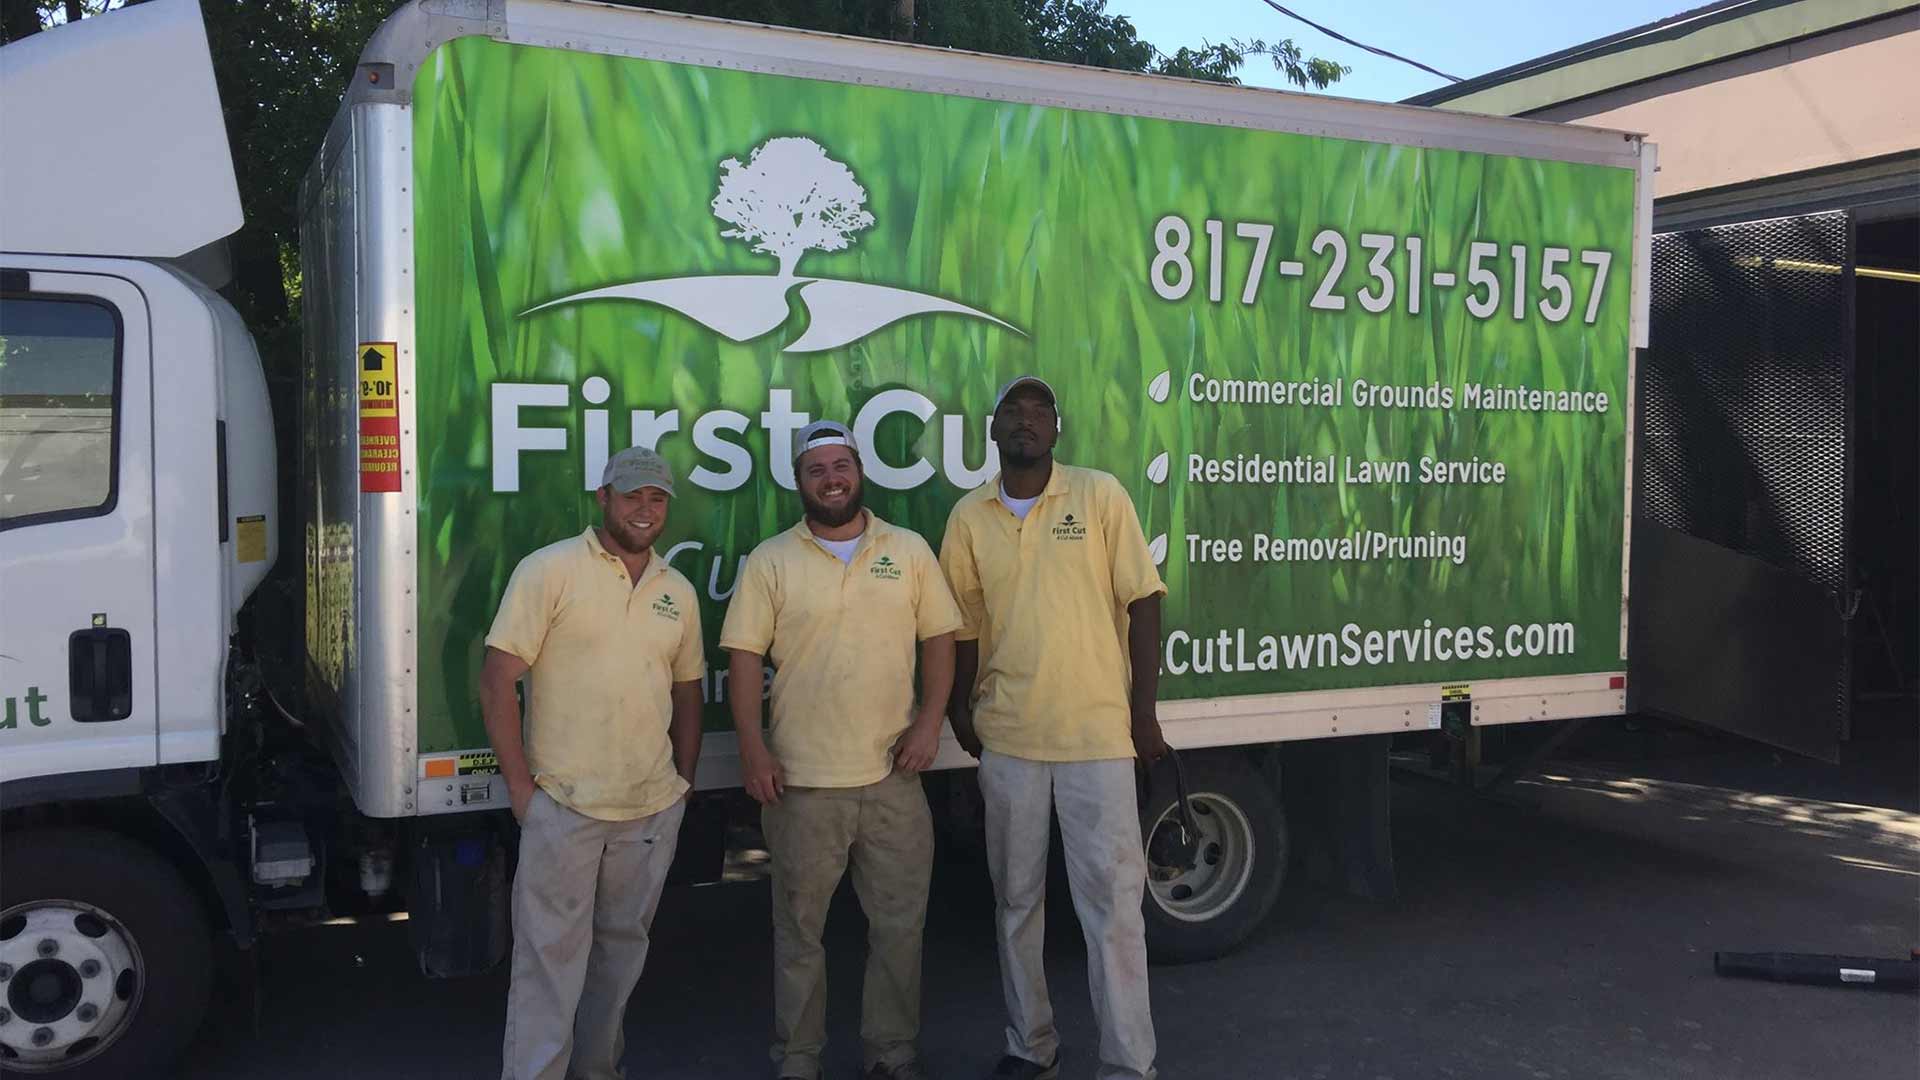 We Were Listed Among Best Landscaping & Lawn Care Companies in Fort Worth, TX